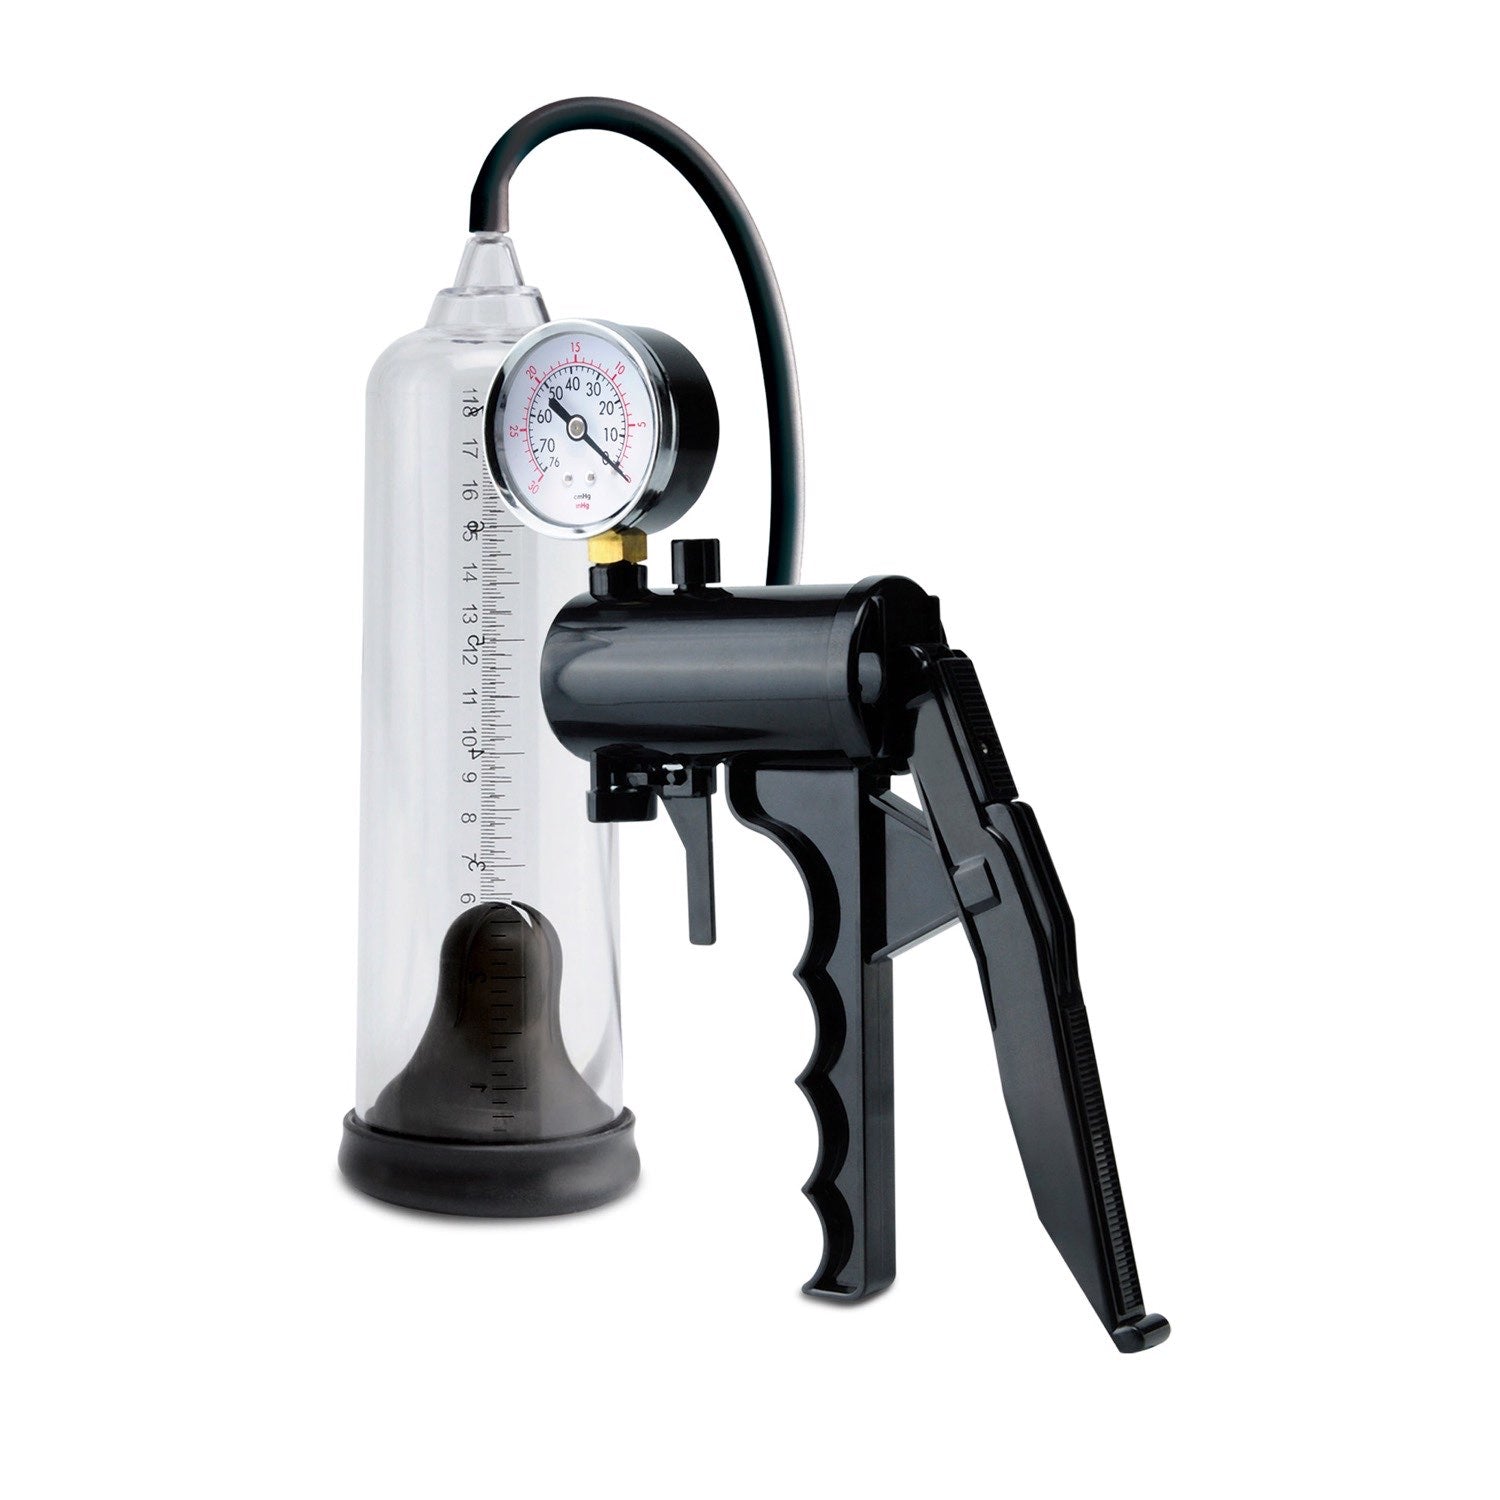 Pump Worx Max-precision Power Pump - Clear/Black Penis Pump with Gauge by Pipedream